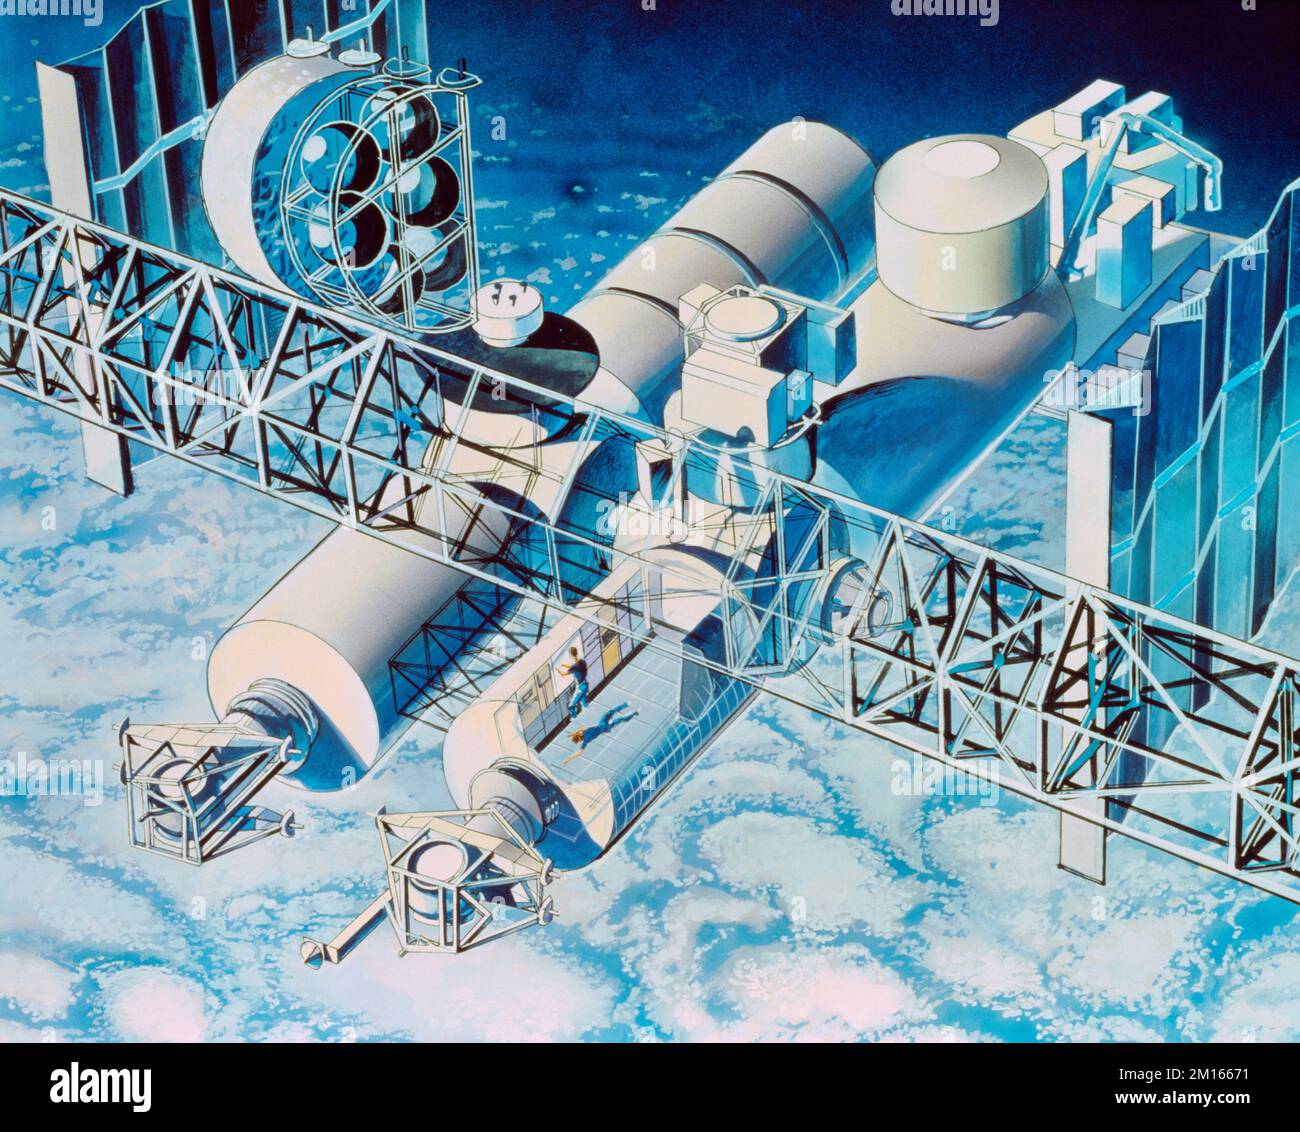 Artist's Impression Of Space Station Stock Photo